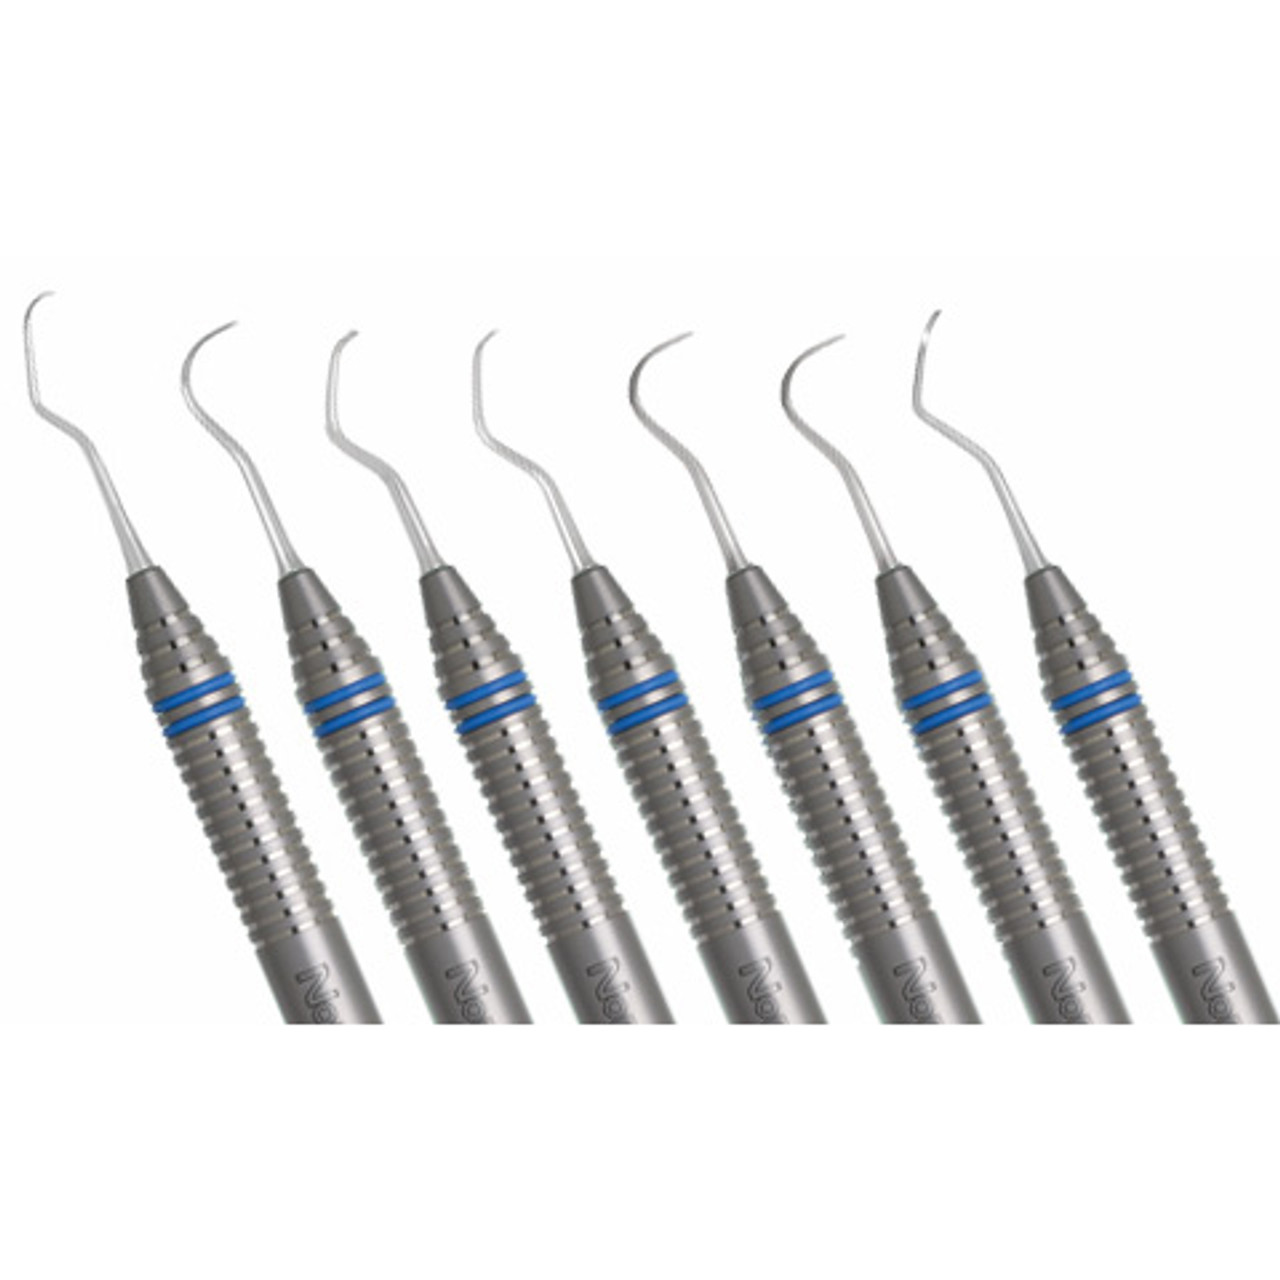 Nordent - Sickle Scaler Double End 204S DuraLite ColorRing Posterior Stainless Steel Each